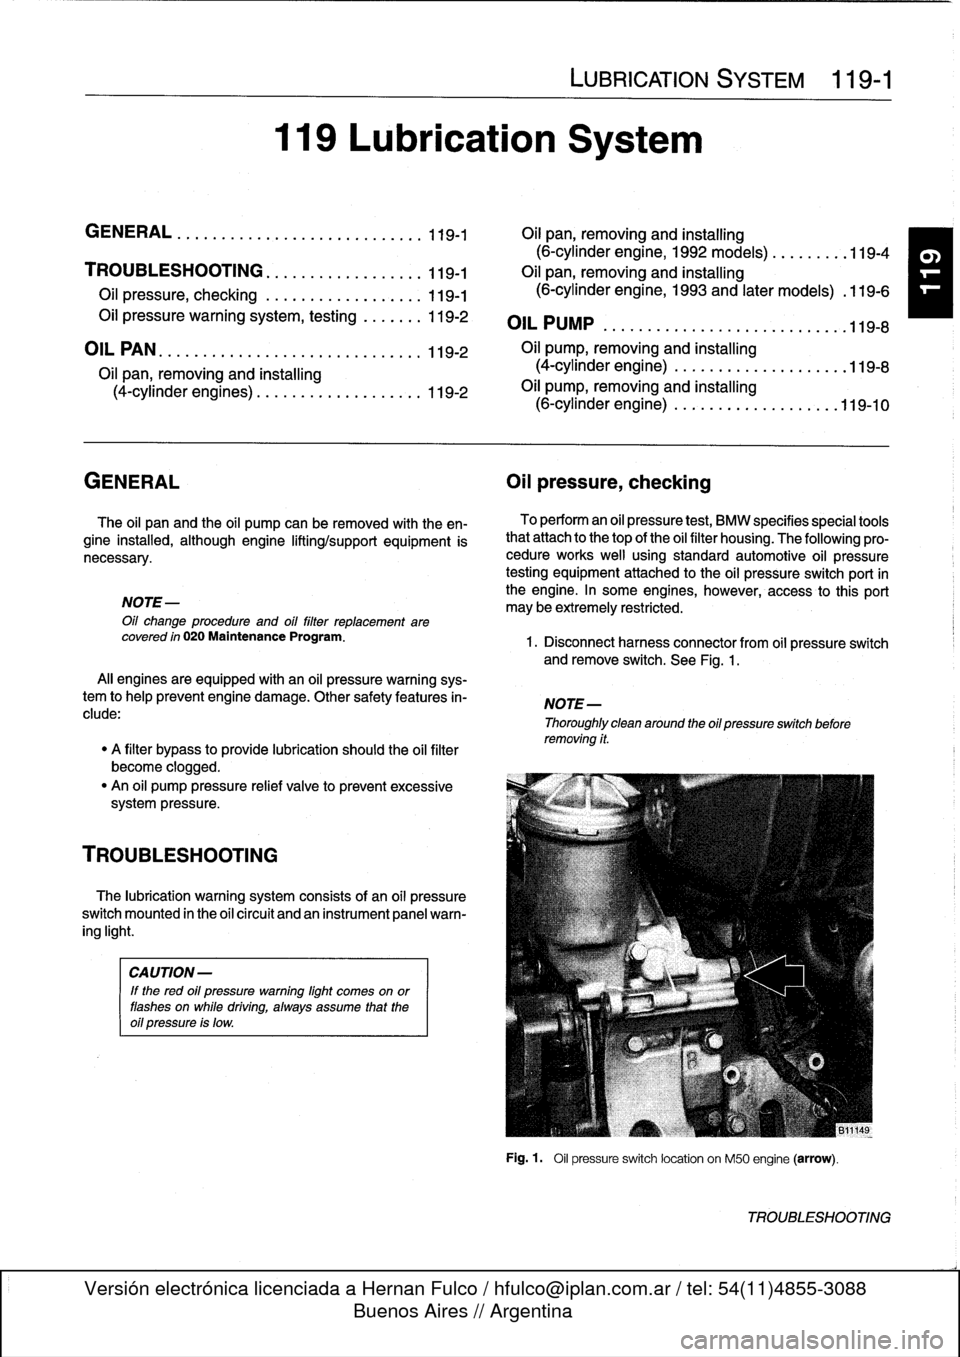 BMW M3 1996 E36 Service Manual 
119
Lubrication
System

LUBRICATION
SYSTEM

	

119-1

GENERAL
.
.
.
.
.
.
...
.
.
.
.
.
.
.
...,
,
...
.
.
.
.
119-1

	

OH
pan,
removing
and
installing

(6-cylinder
engine,
1992
models)
.
.
.
.
.
.
